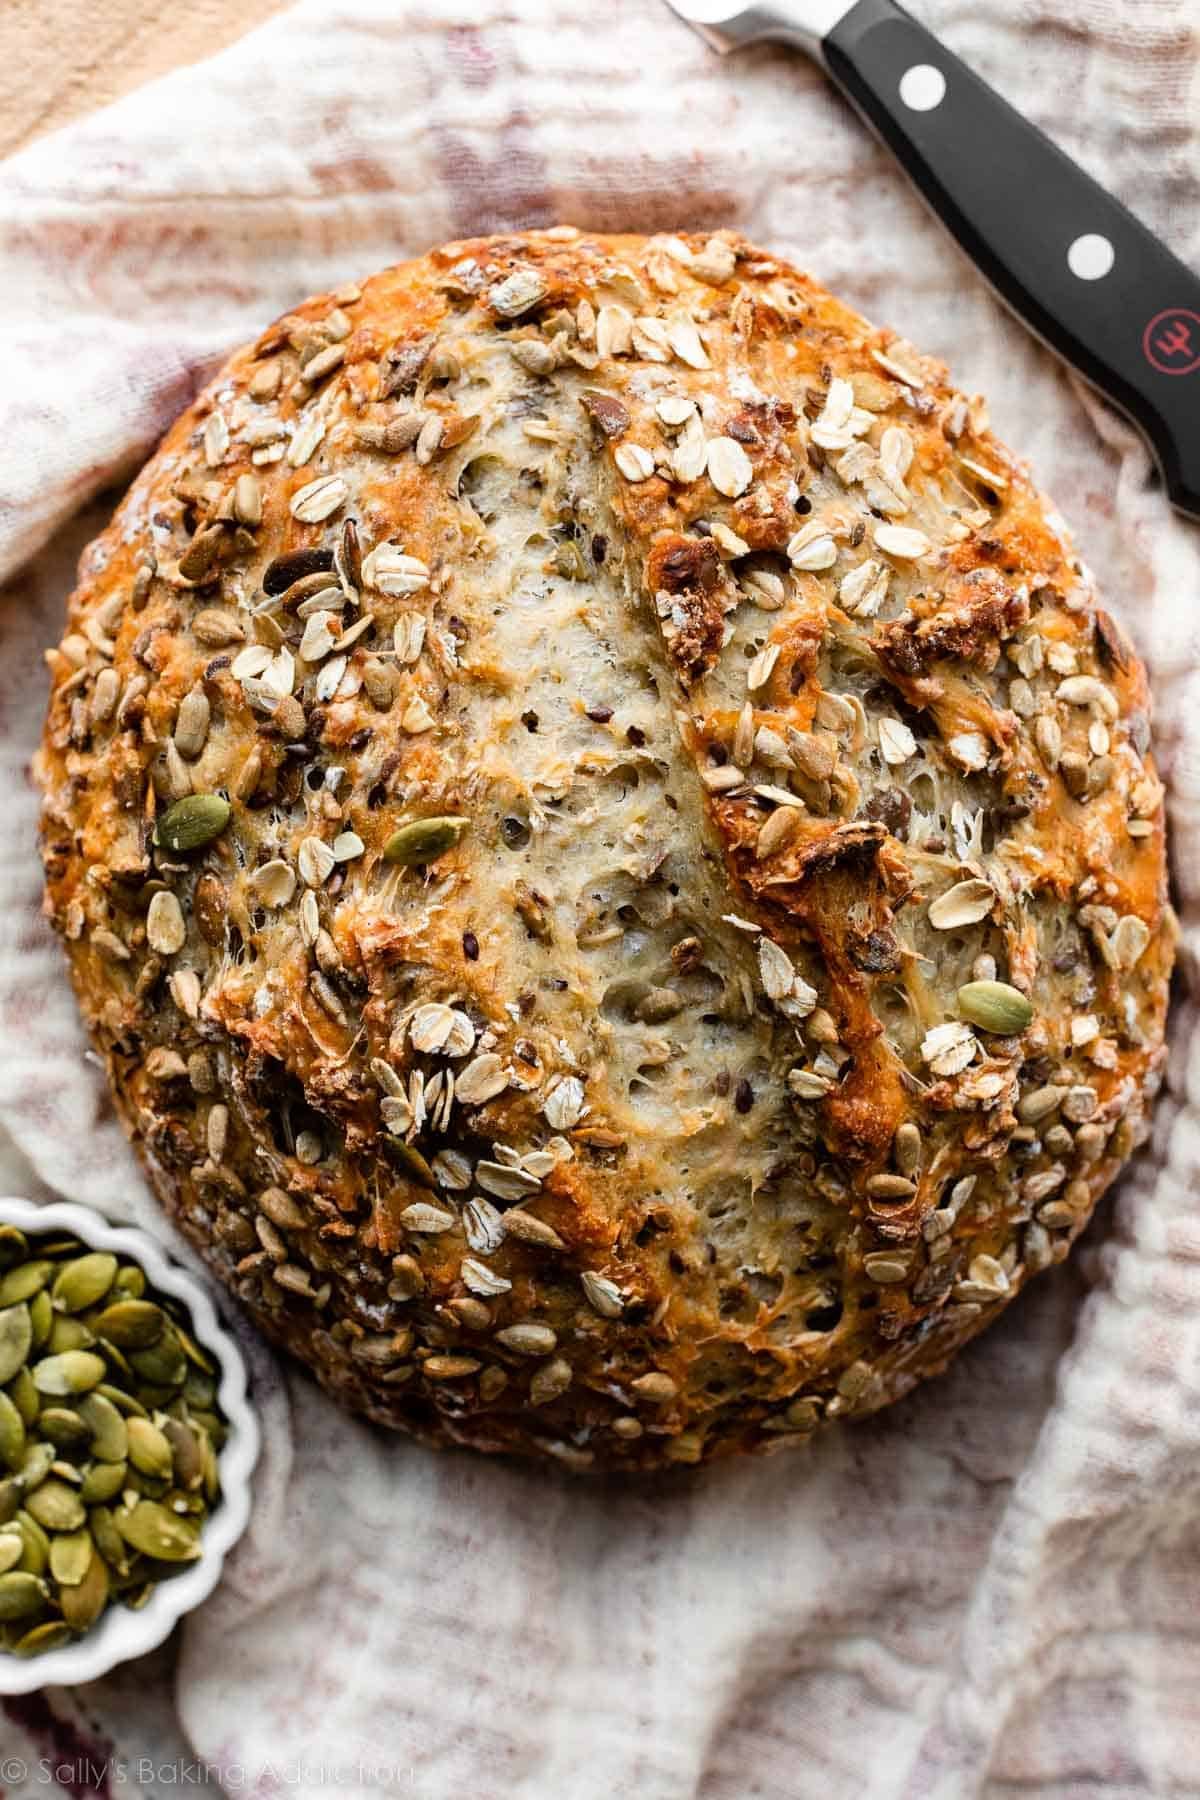 round boule of seeded bread on ivory linen.